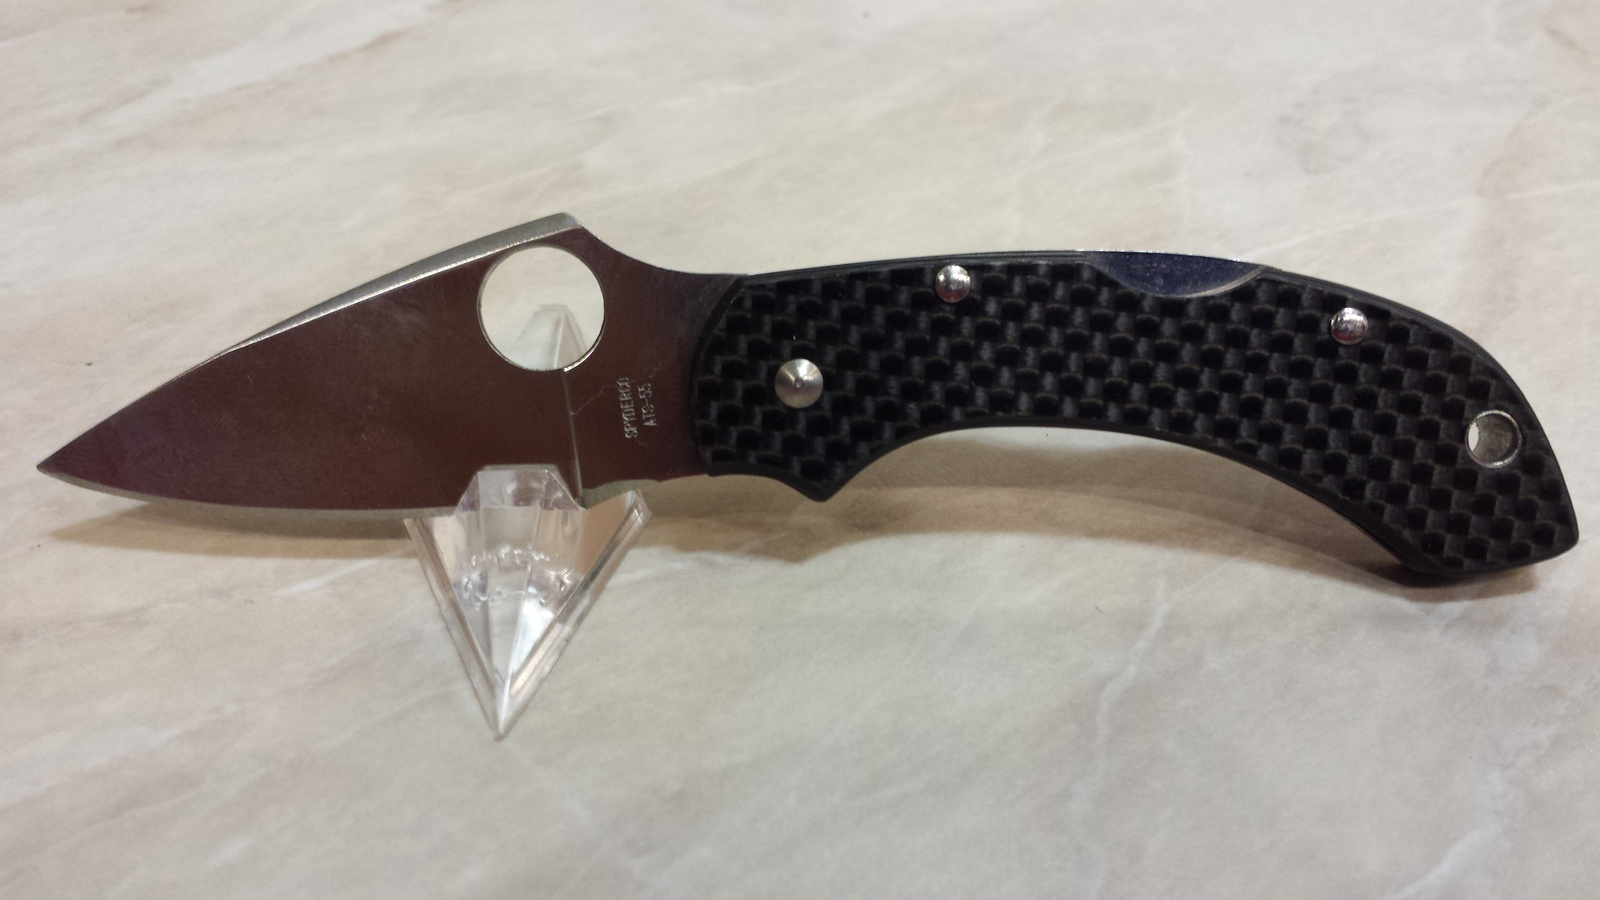 Spyderco Dragonfly 2 Carbon